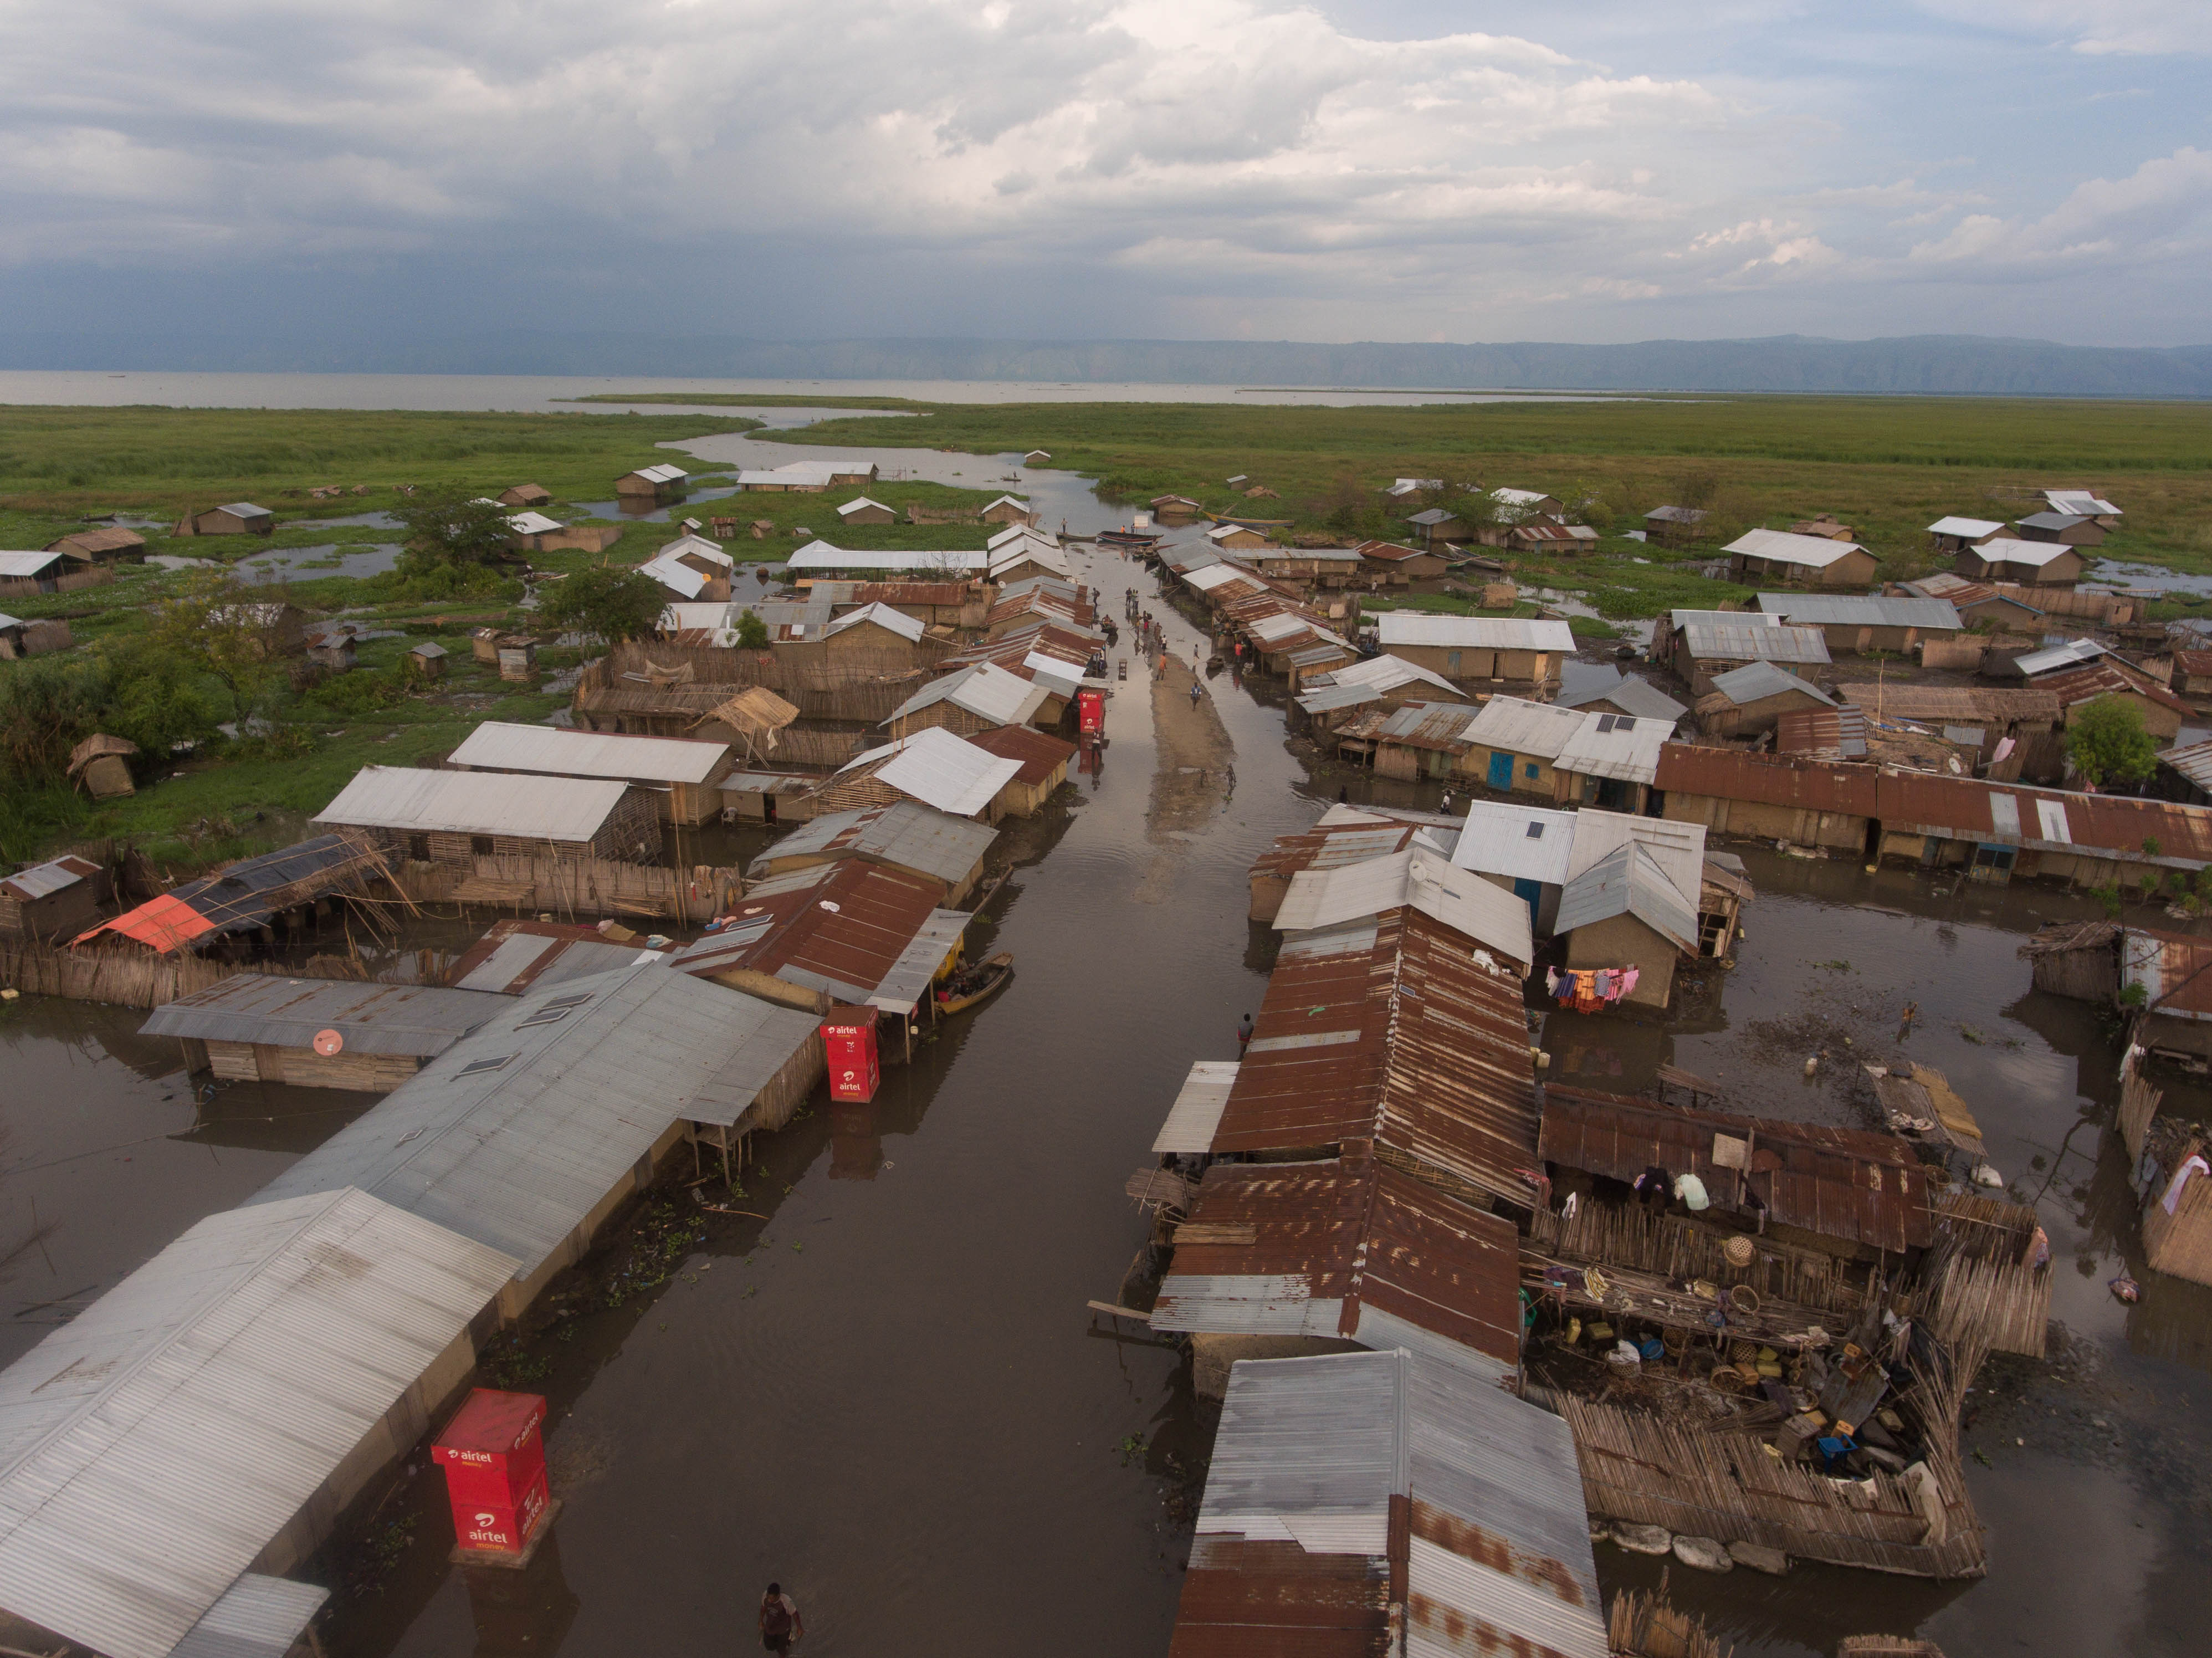 Flooding from heavy rains inundates the Ugandan fishing village of Rwangara in 2020. Floods and drought reinforce poverty and the opportunities for recruitment of youth to violent extremism, says peacebuilder Muhsin Kaduyu. (ClimateCentre/CC License 2.0)